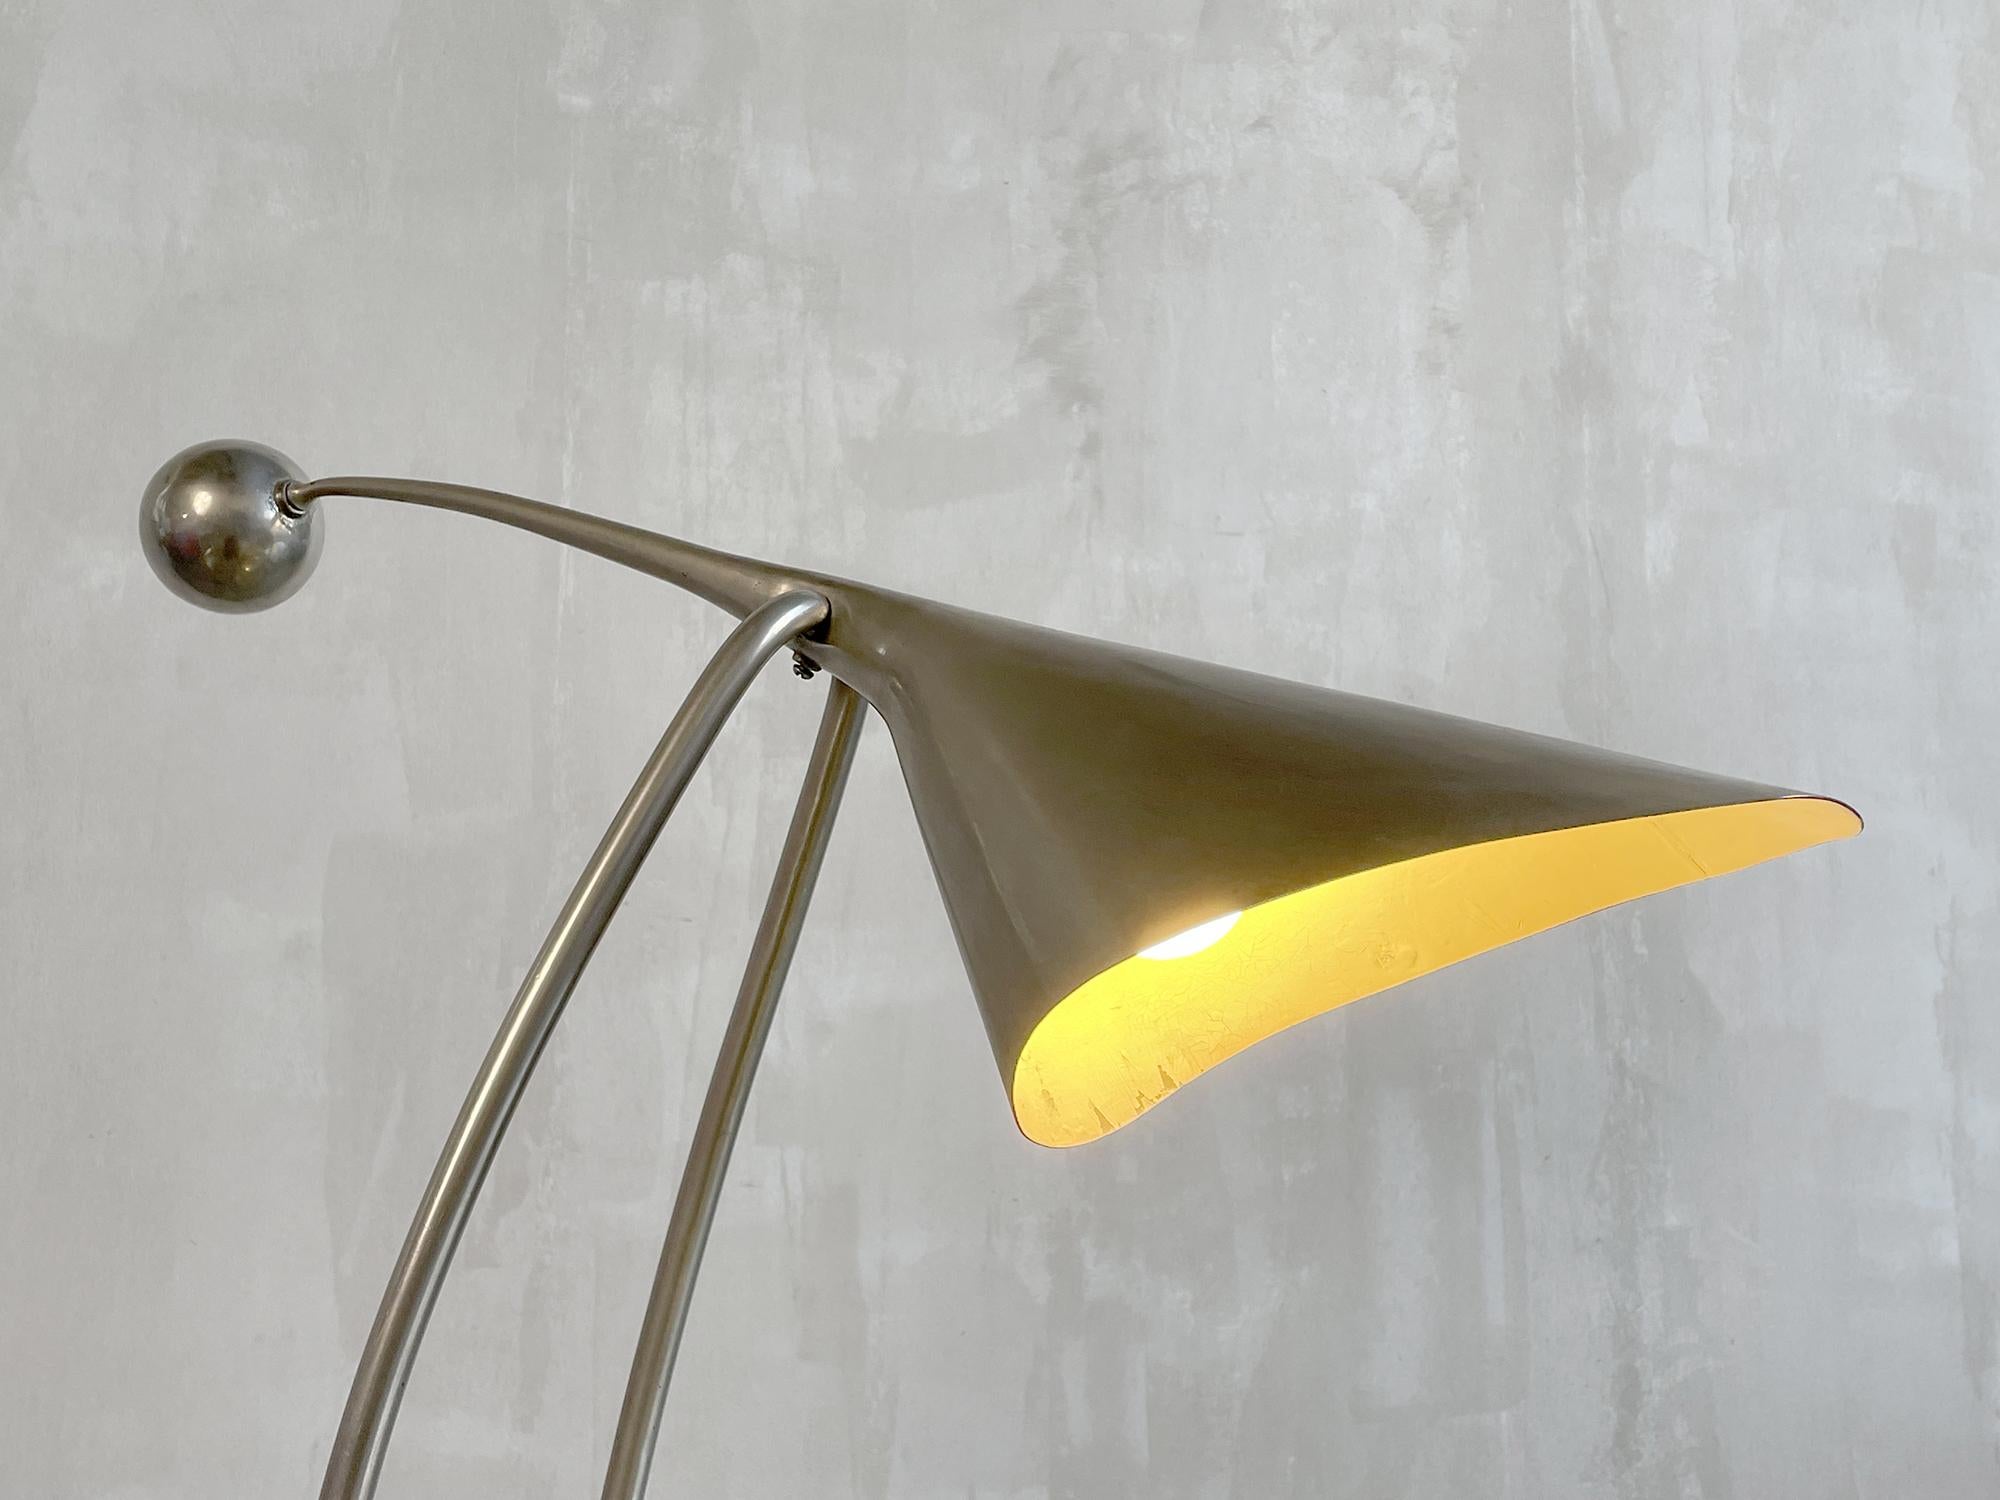 Spectacular pendulum lamp in polished metal, France 1960. The reflector in the shape of a witch's hat is counterbalanced by a counterweight, the rocking movement is slowed down by a screw. The tubular base is joined by a sphere fitted with a